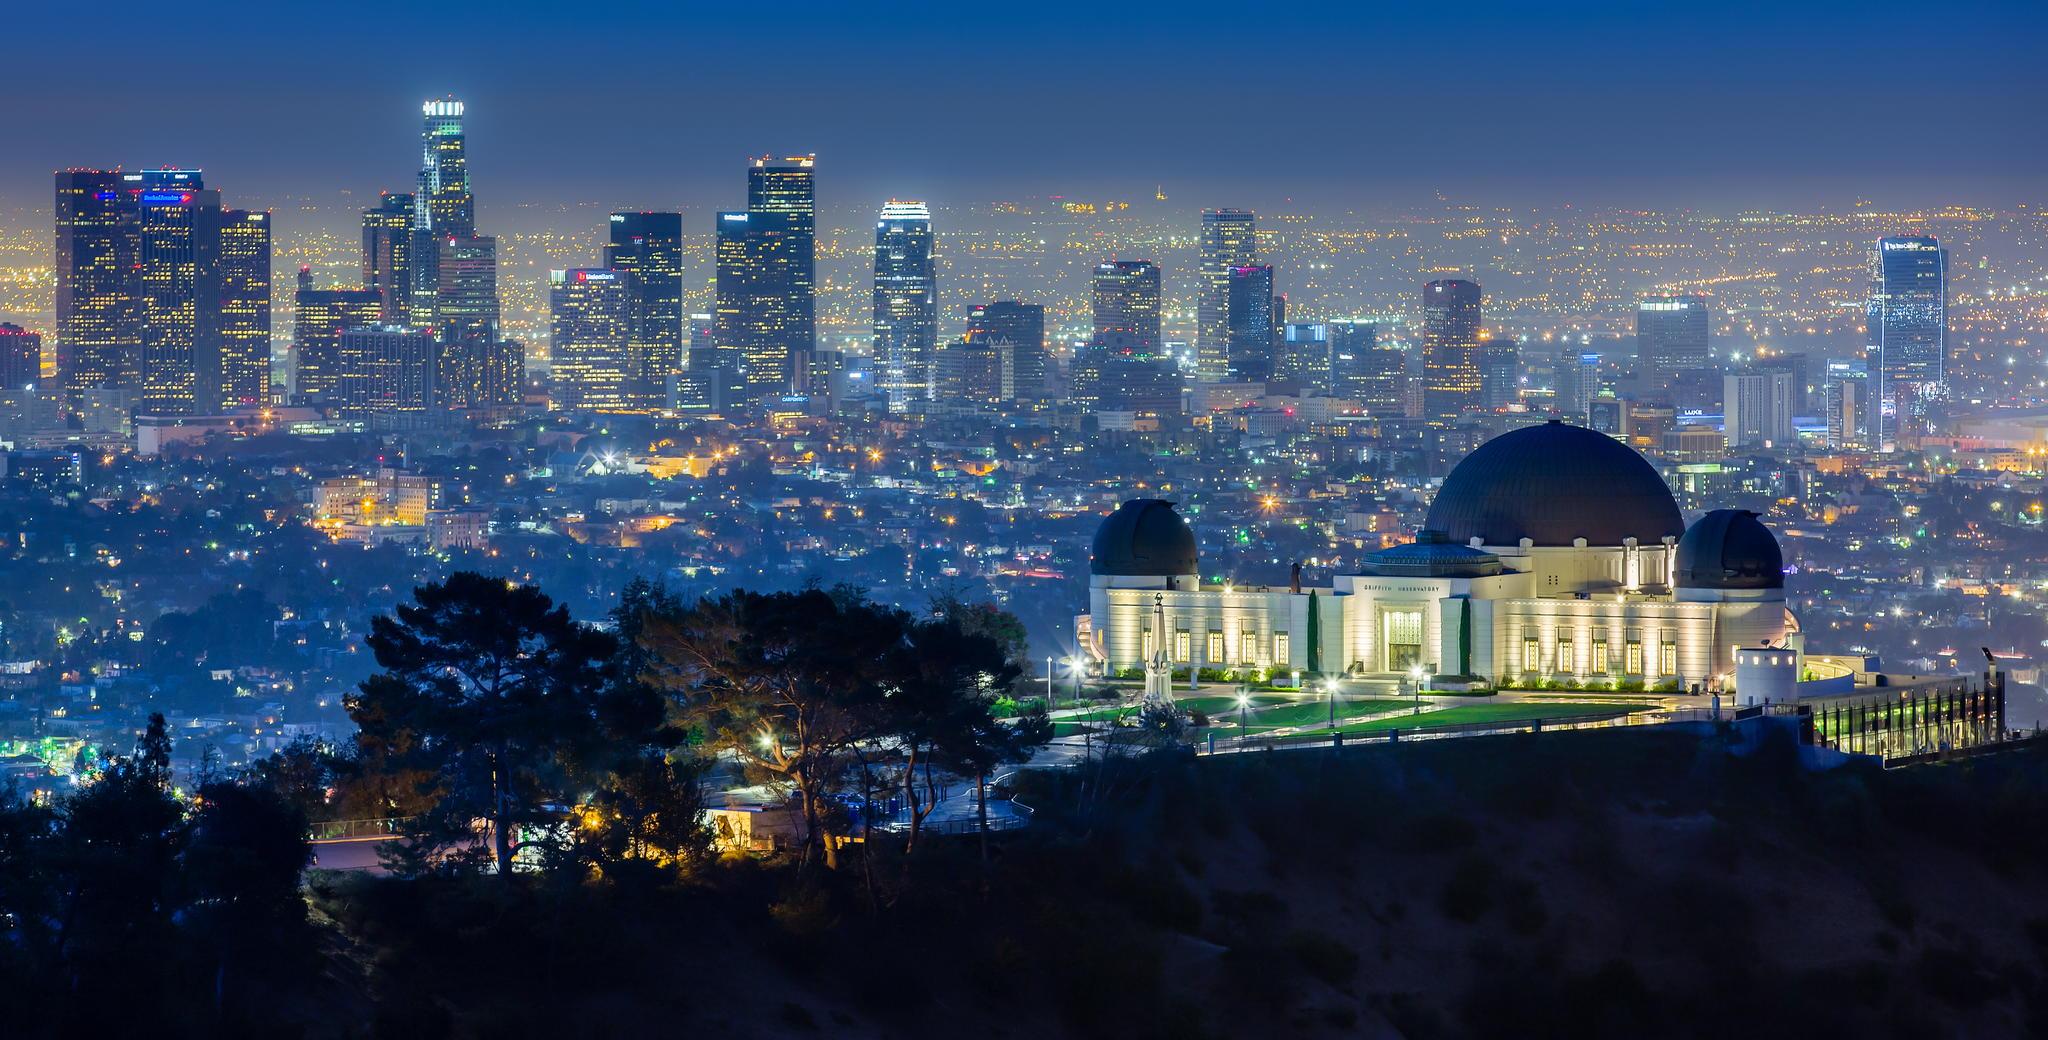 2048x1040px Griffith Observatory 428.09 KB